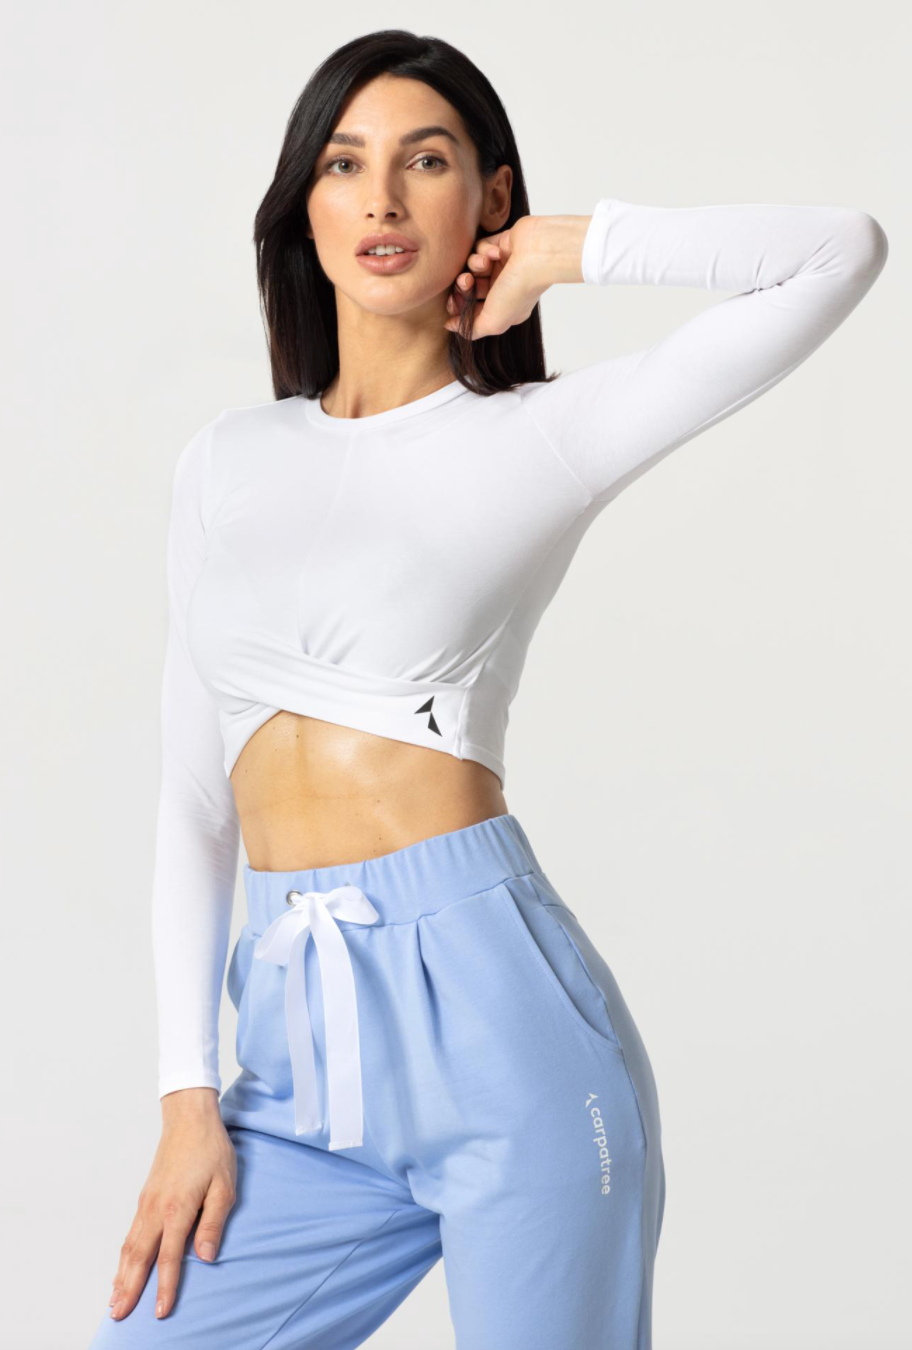 Carpatree Gaia Longsleeve Top - White cropped long sleeve sports top with twist detail. Made of soft cotton.